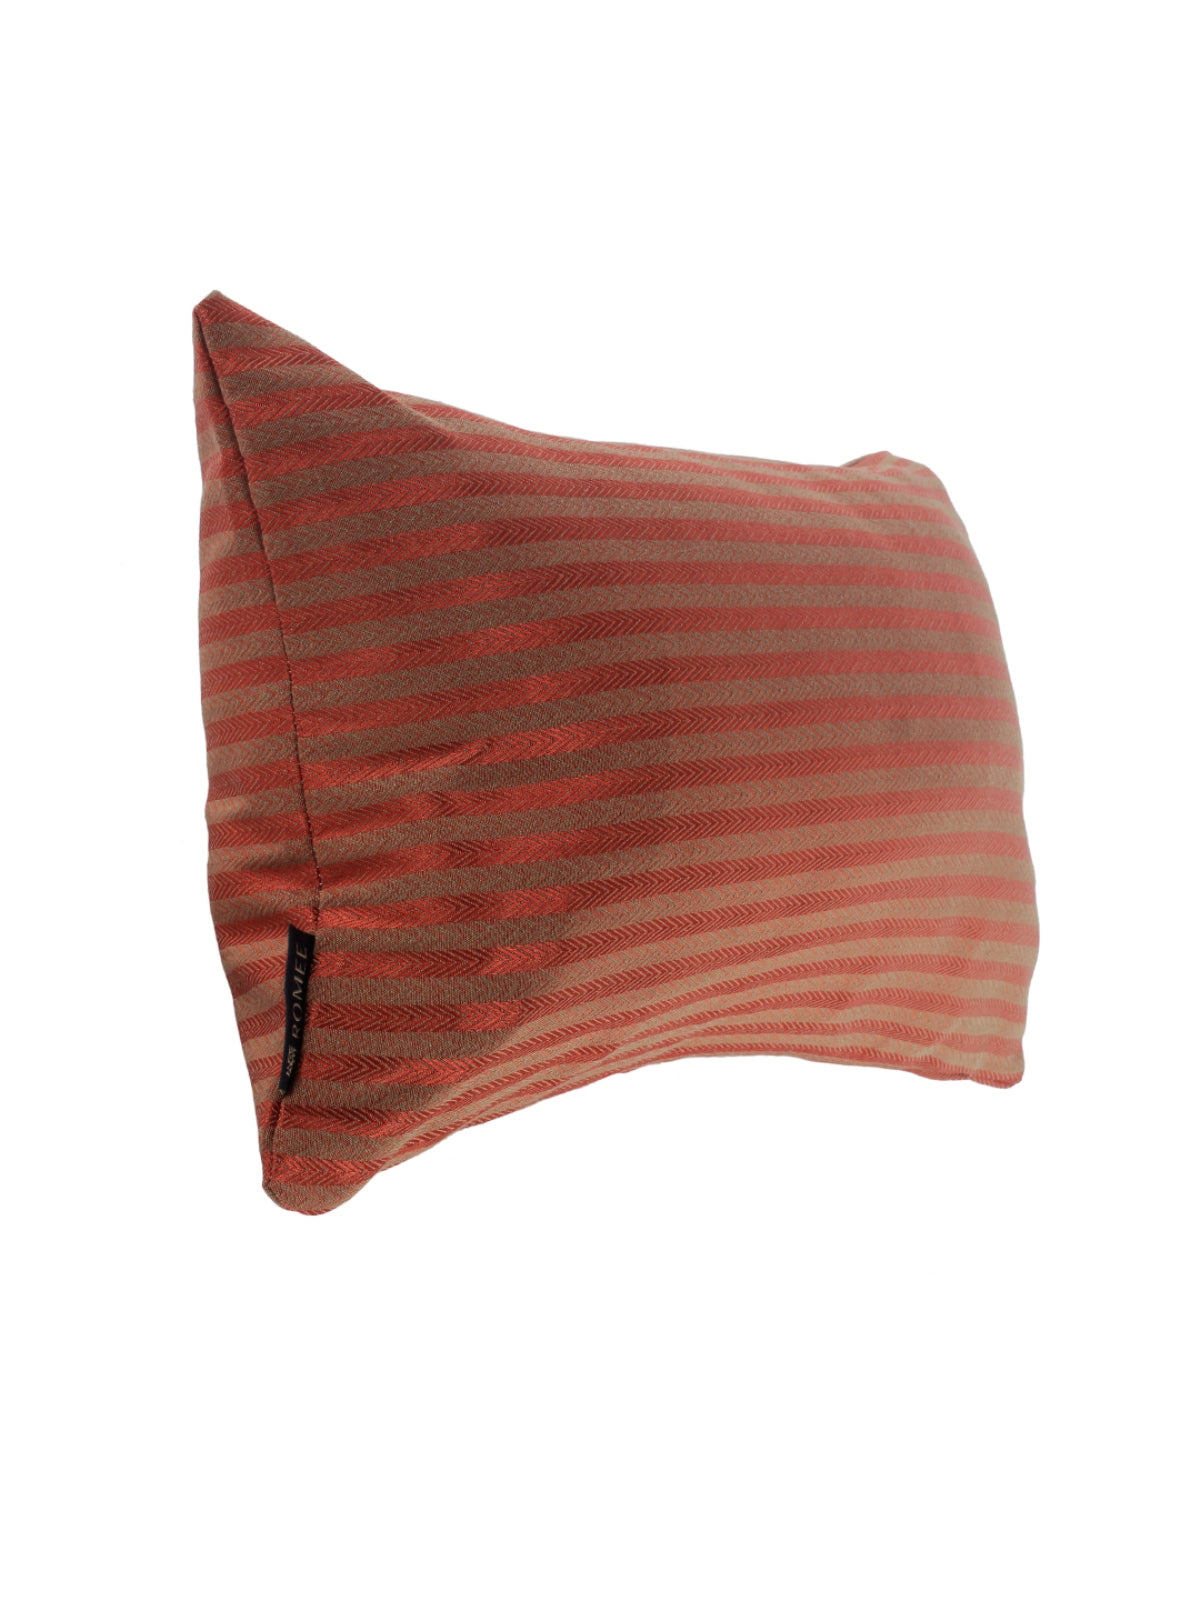 Soft Polycotton Striped Cushion Covers 12 Inch x 18 Inch, Set of 2 - Red & Beige